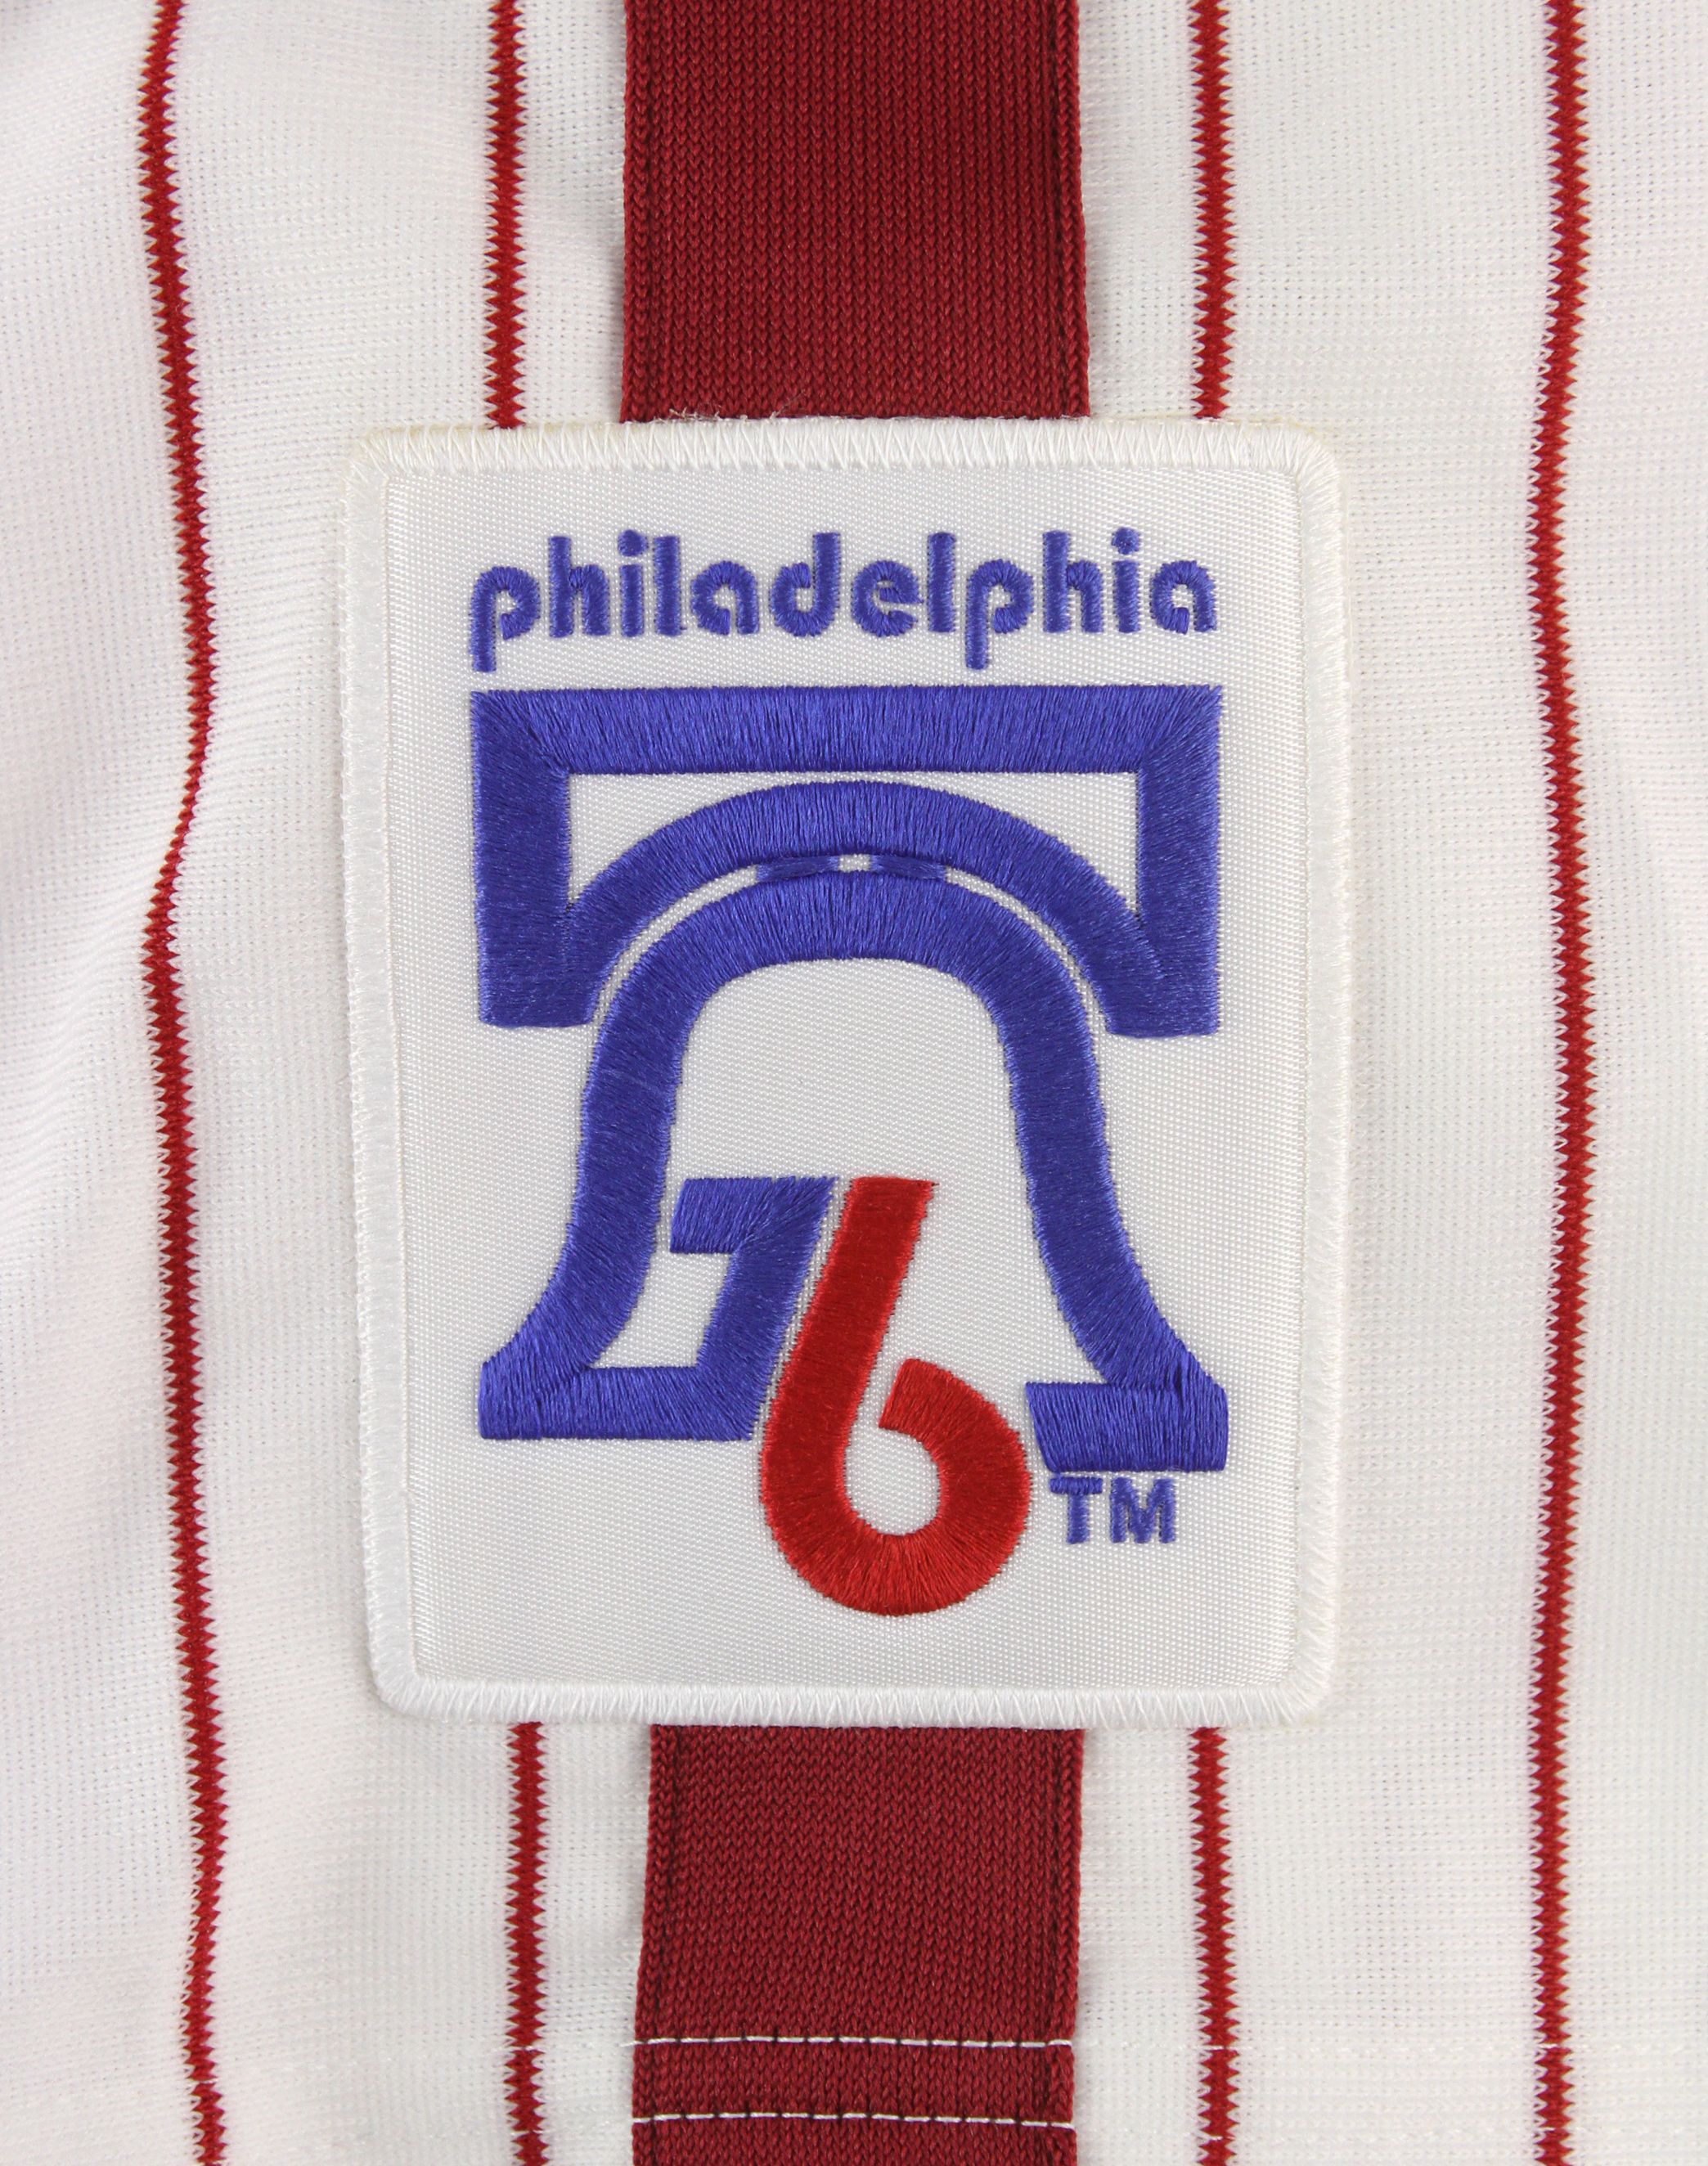 Lot Detail - 1976 Tim McCarver Philadelphia Phillies Mitchell & Ness High  Quality Reproduction Home Jersey